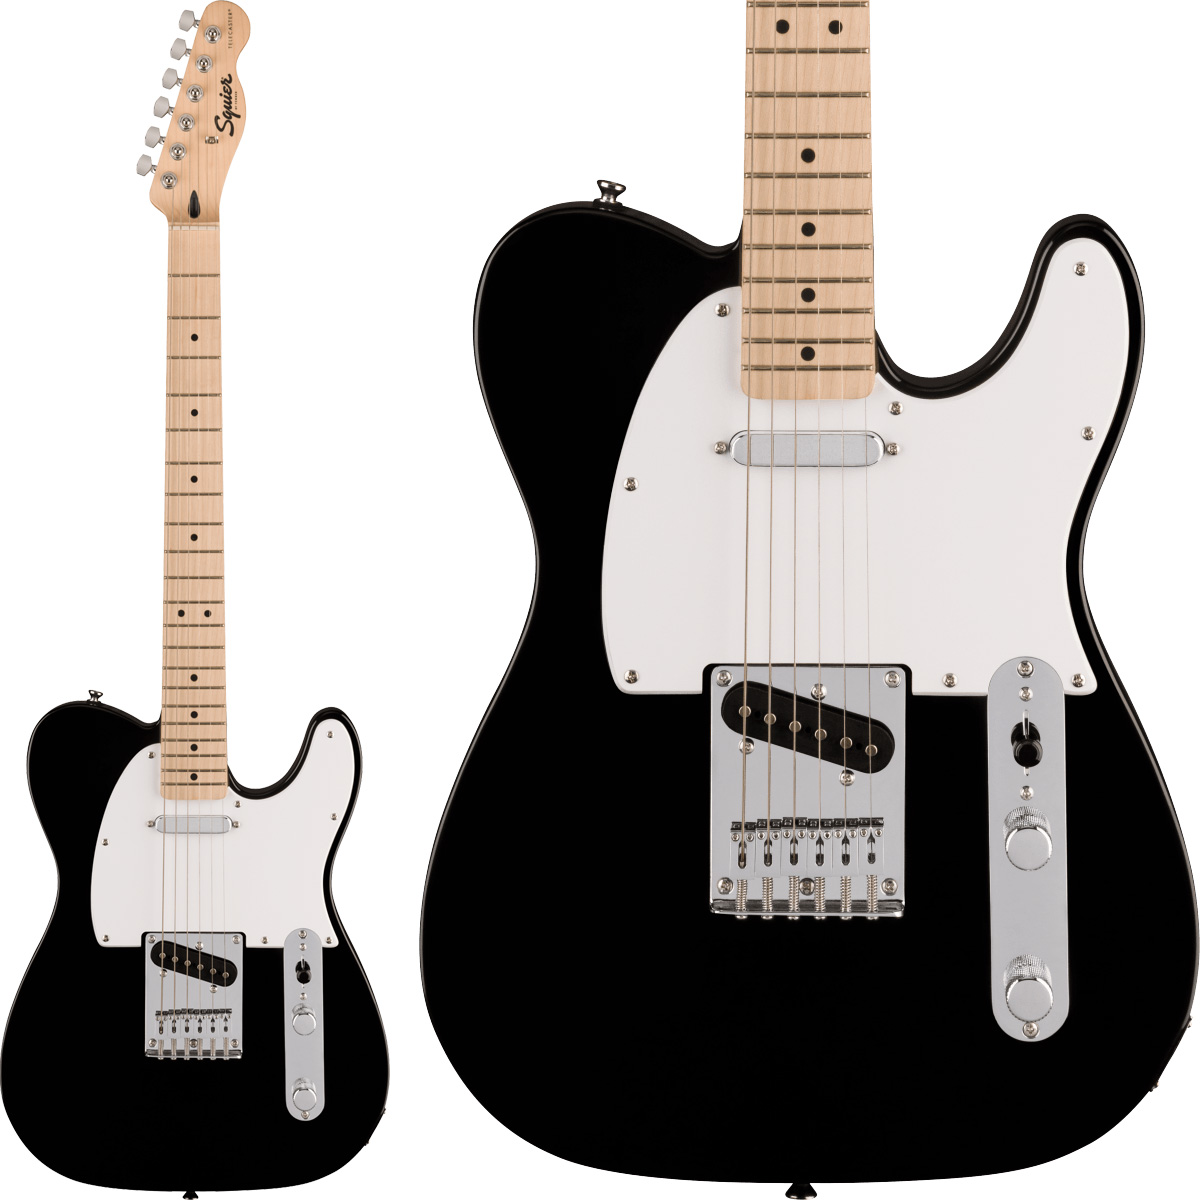 Squier by fender Telecaster エレキギターフェンダー